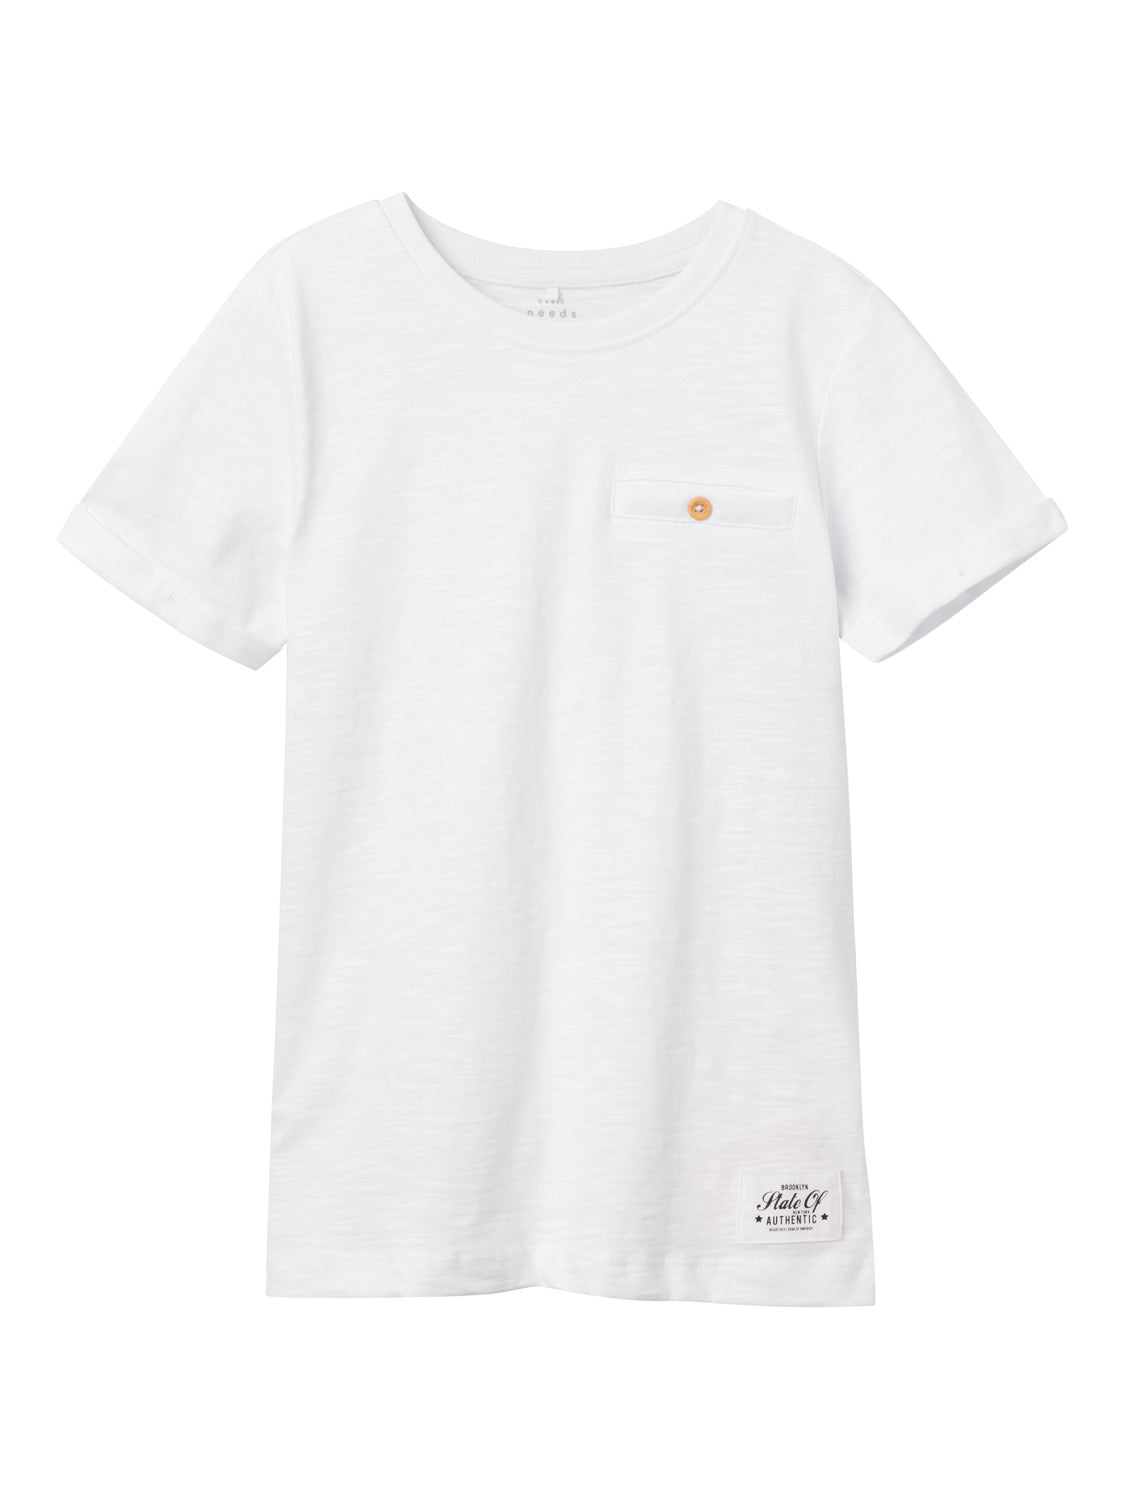 NKMVINCENT T-Shirts & Tops - Bright White